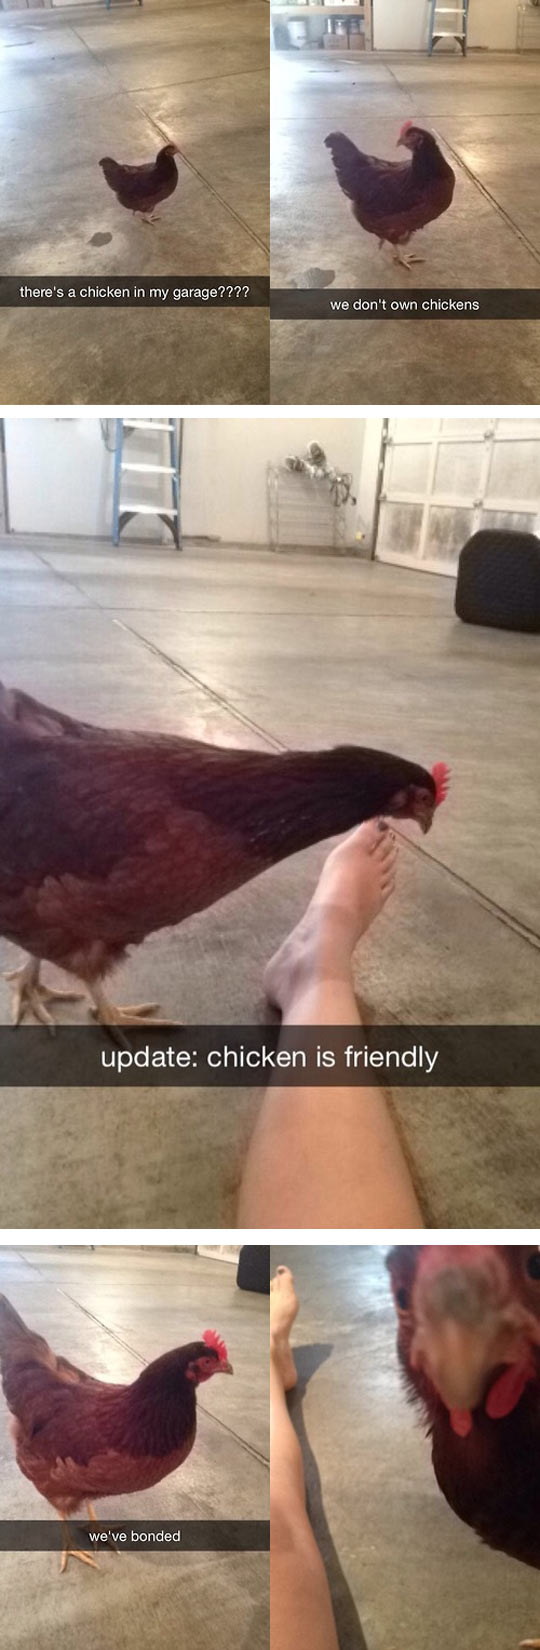 There is a chicken in my garage.